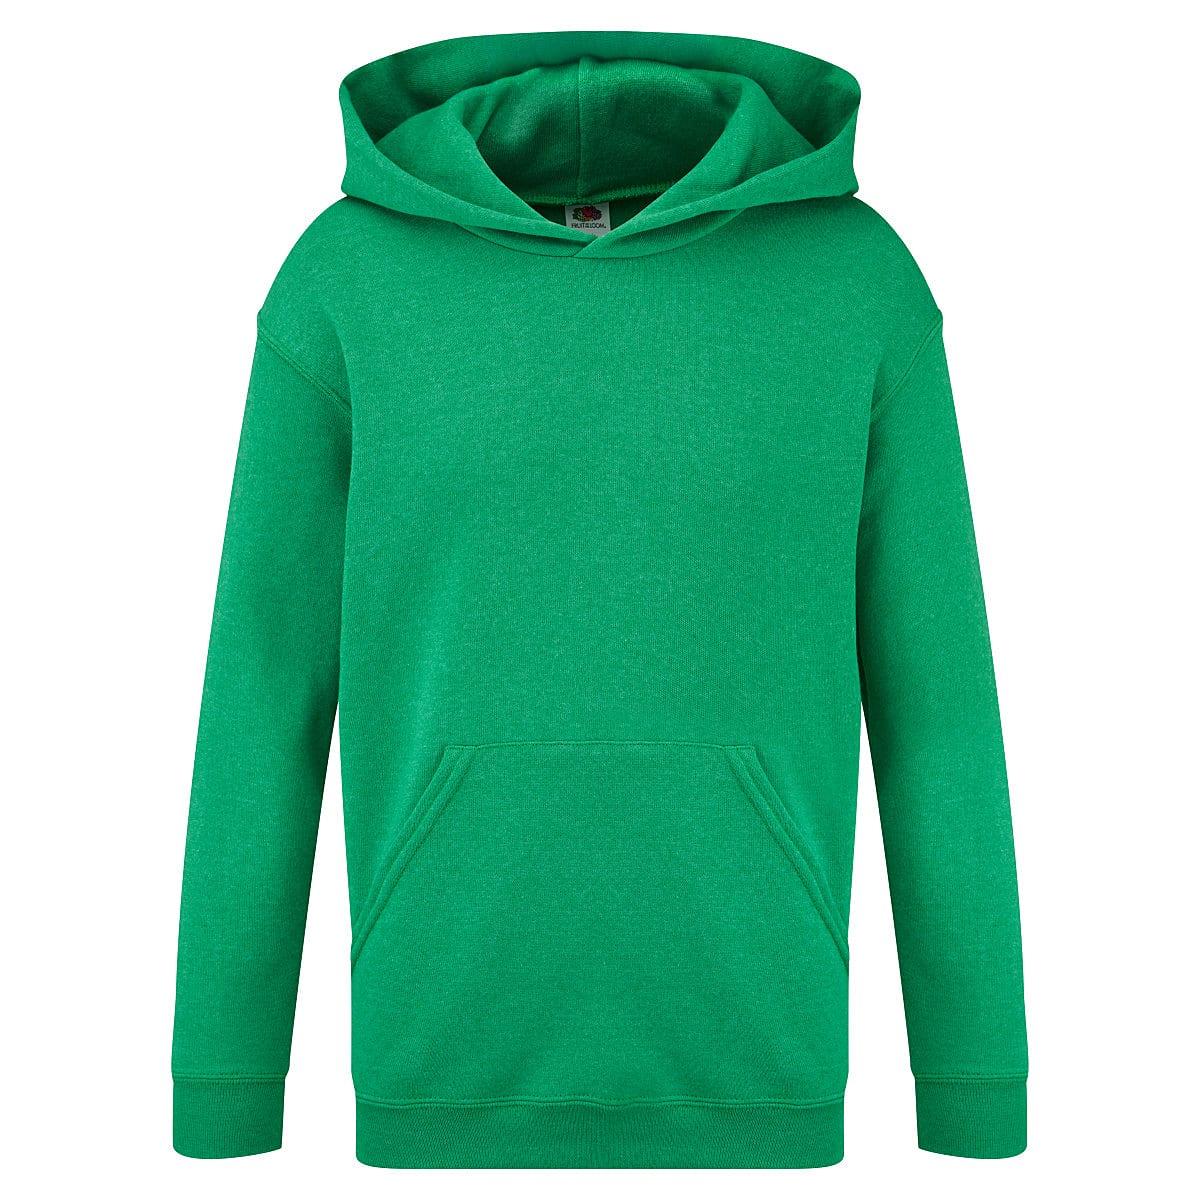 Fruit Of The Loom Childrens Hoodie in Retro Heather Green (Product Code: 62043)